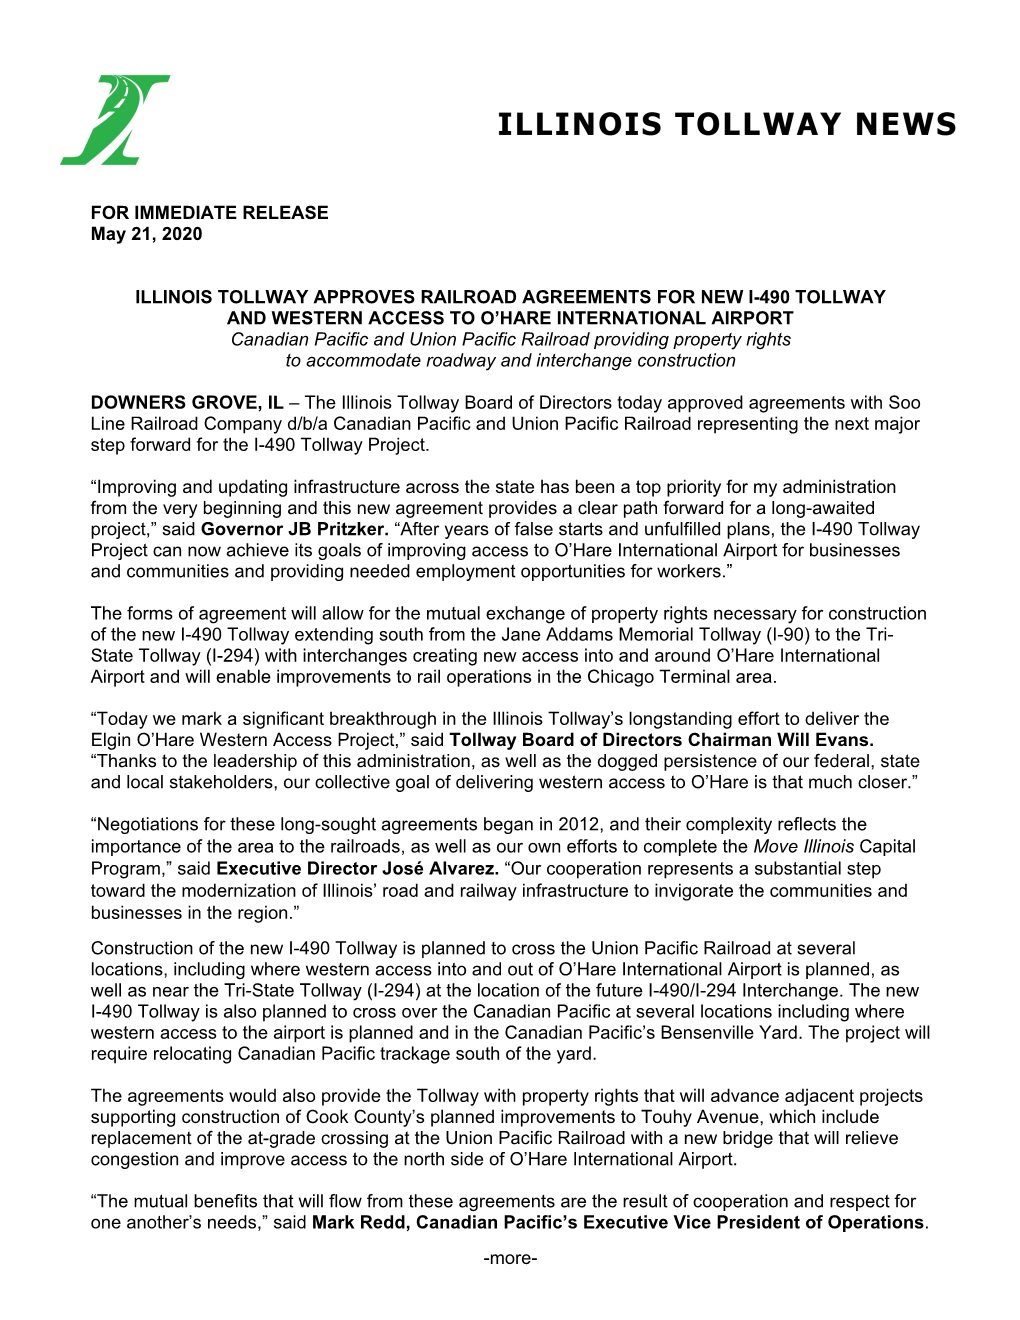 More- for IMMEDIATE RELEASE May 21, 2020 ILLINOIS TOLLWAY APPROVES RAILROAD AGREEMENTS for NEW I-490 TOLLWAY and WESTERN ACCE